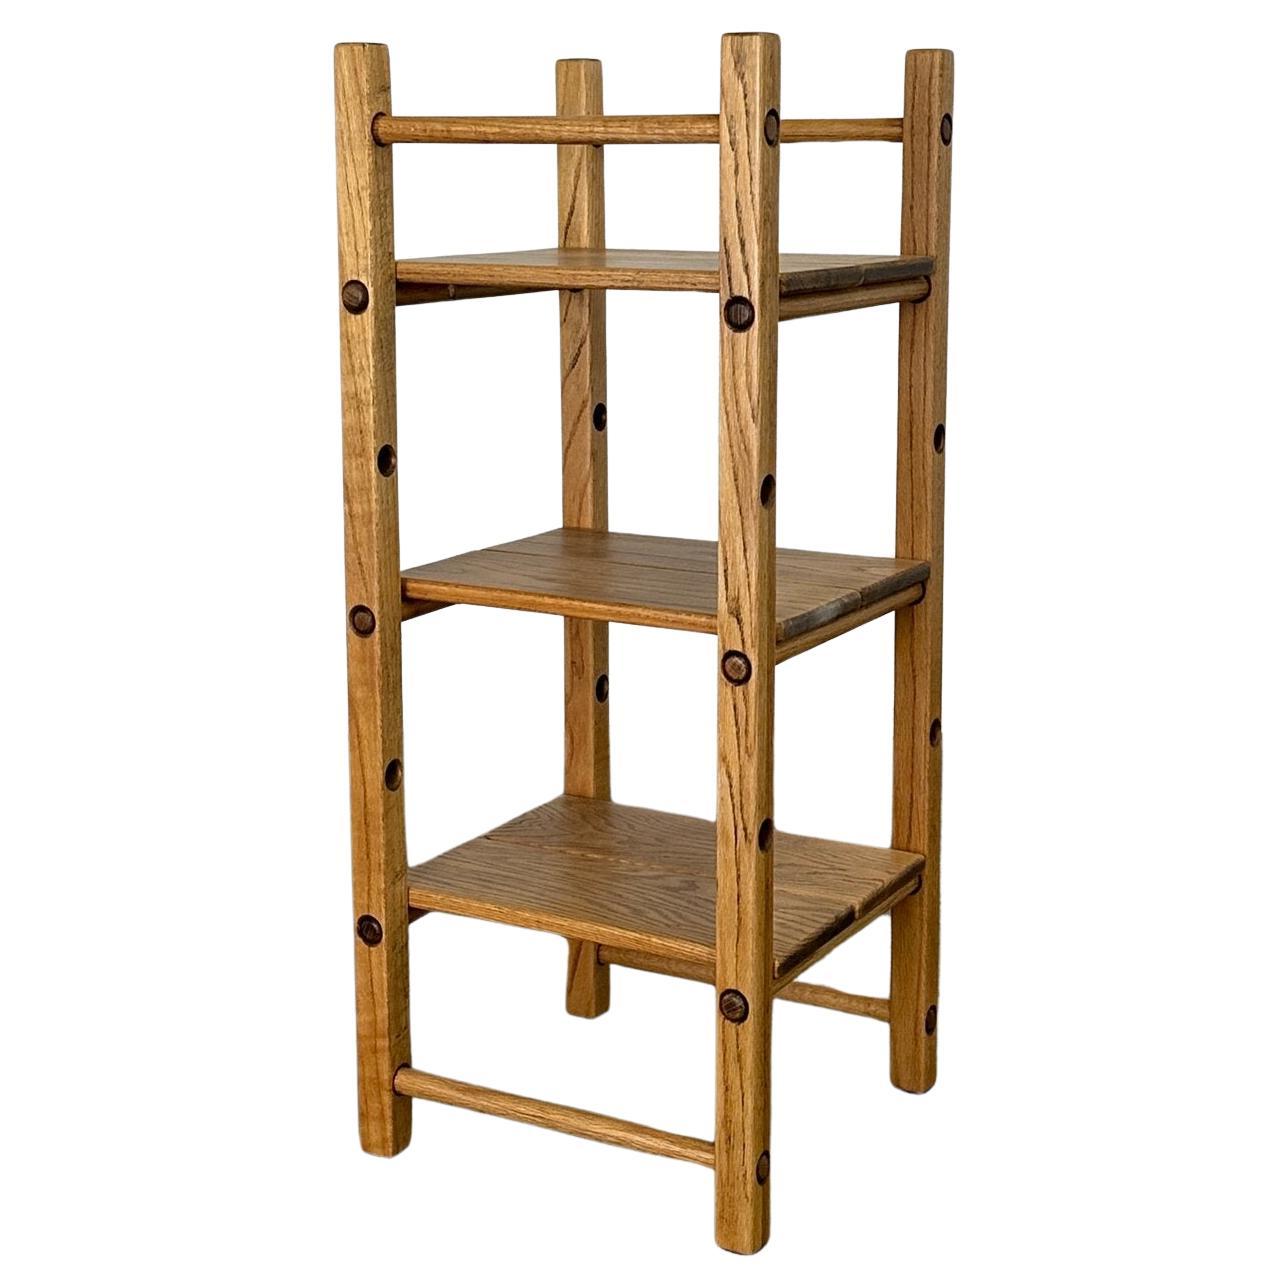 Dowel system tiered shelving unit